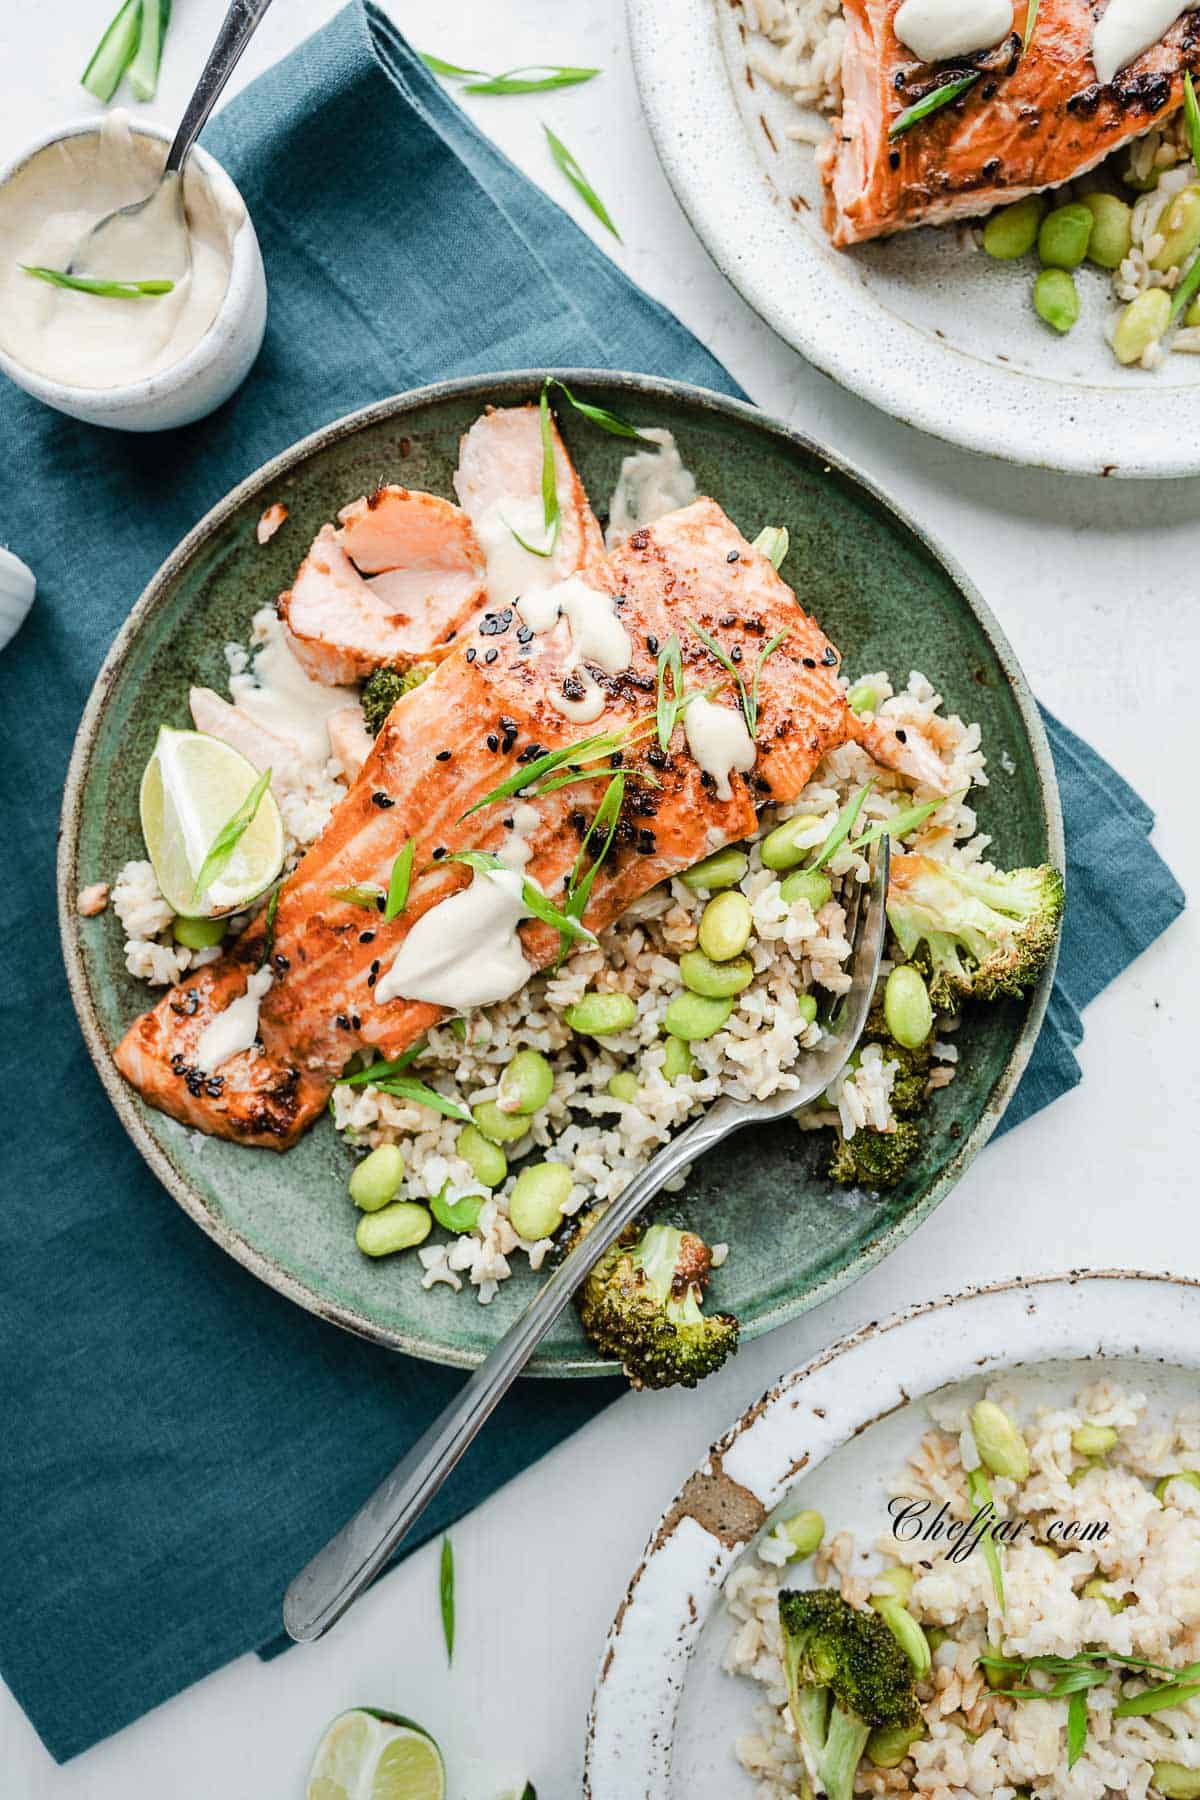 salmon is served on the bed of brown rice with beans and drizzled with tahini dressing.